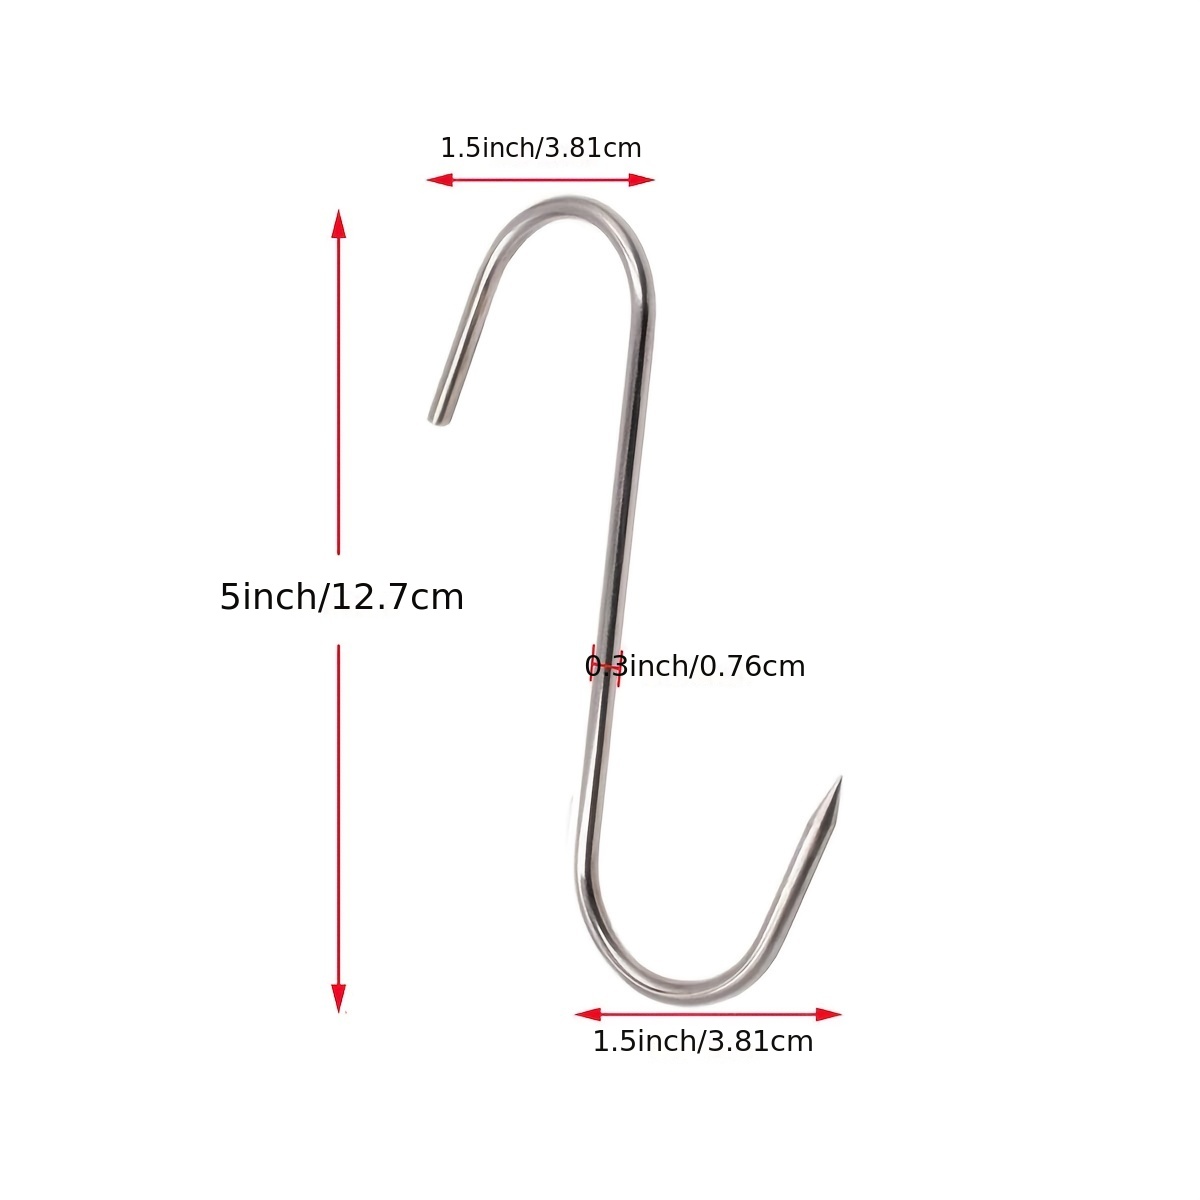 S Hooks For Hanging Meat, 20ps Stainless Steel Sharp Prong S-hooks